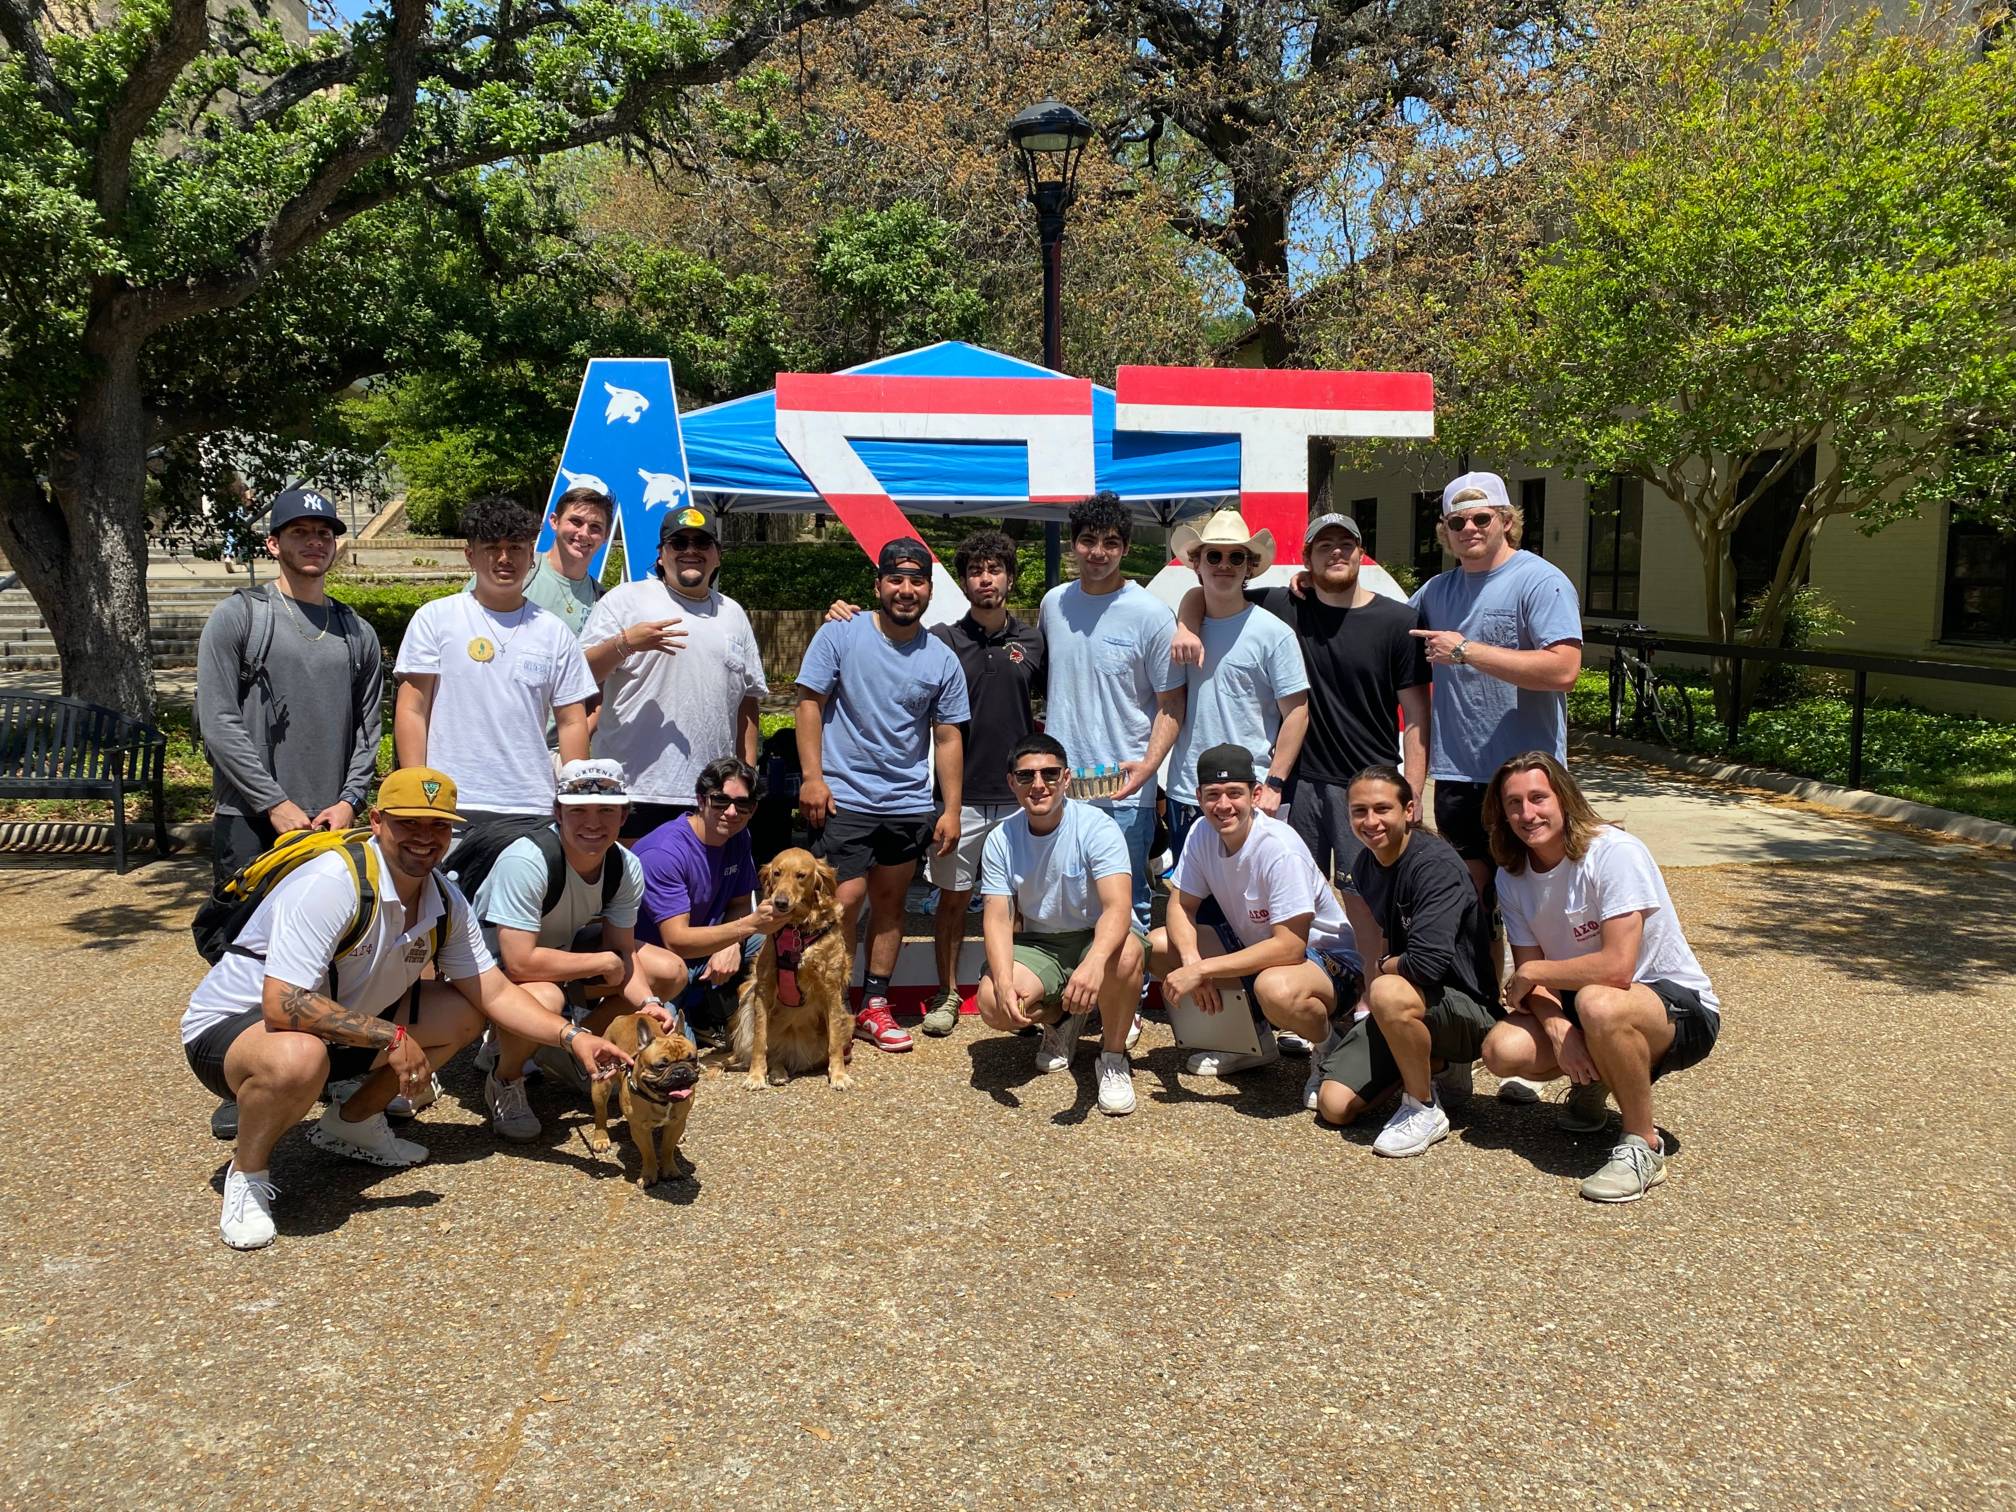 Men of Delta Sigma Phi pose in the Quad in front of their letters. Two dogs are also in the photo.